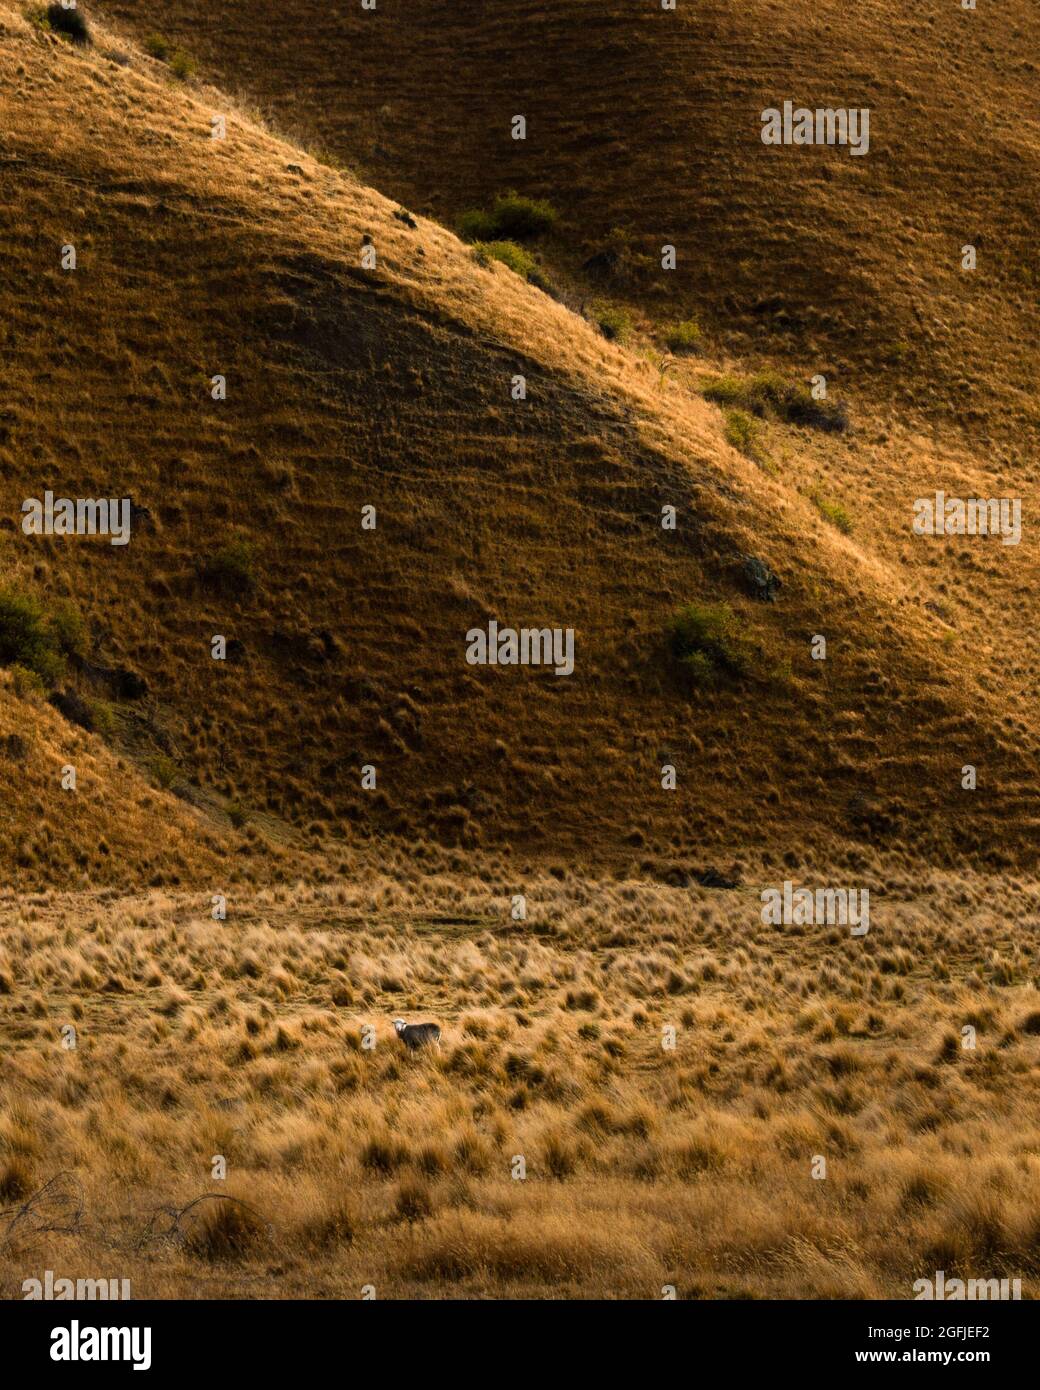 Sheep standing among the tussocks under the rolling hills at Lindis Pass, South Island. Vertical format. Stock Photo